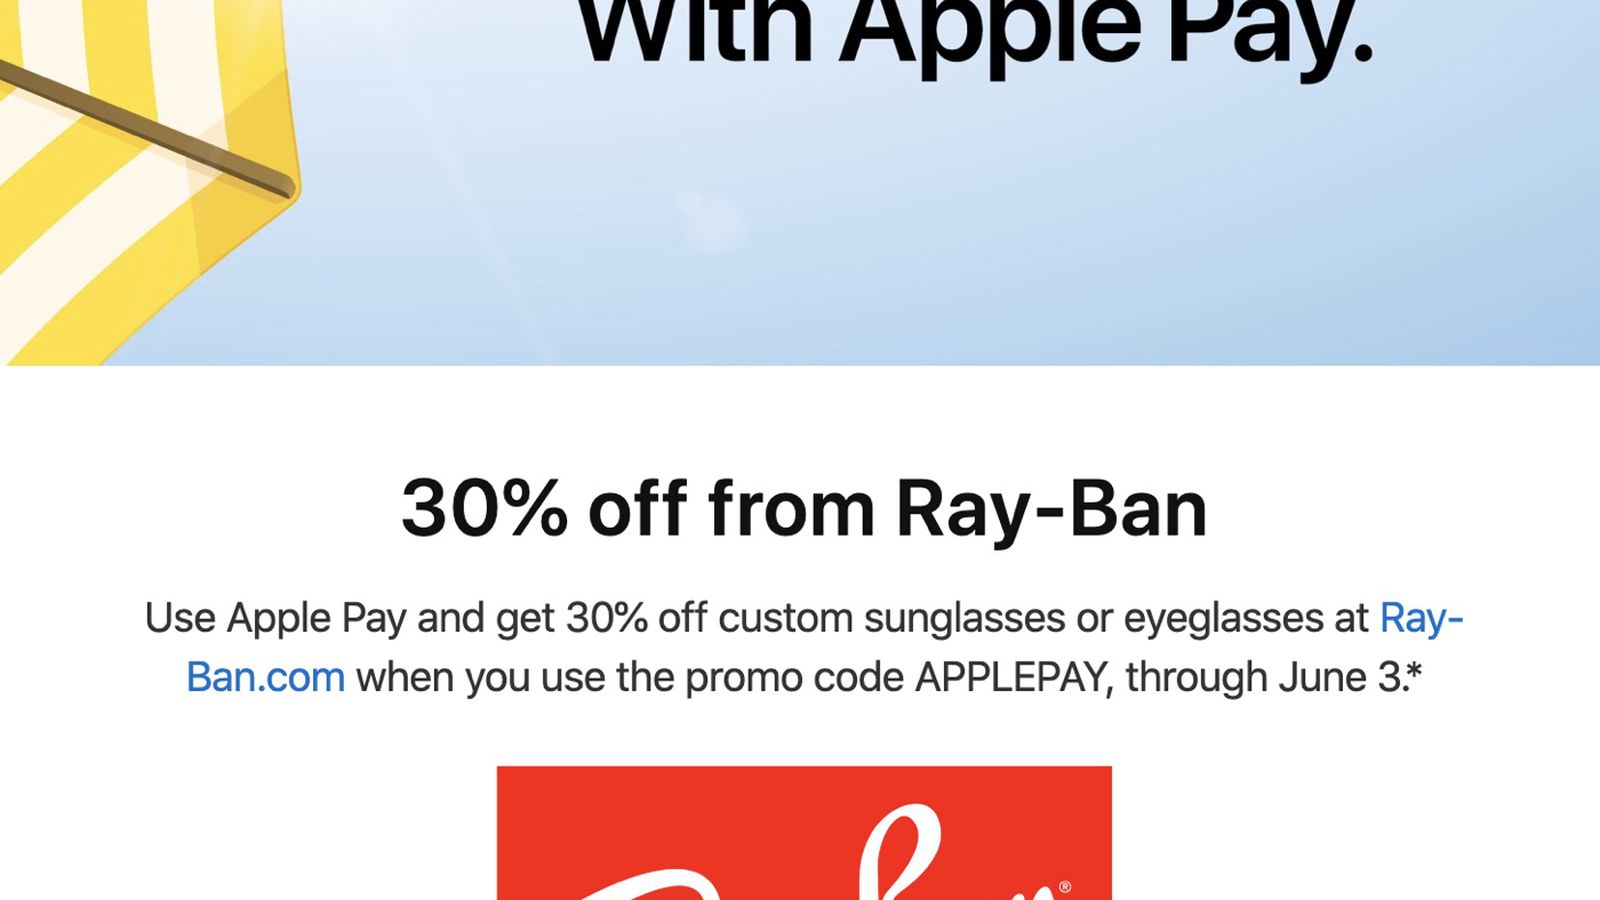 Apple Pay Promo Offers 30% Discount From Ray-Ban - MacRumors